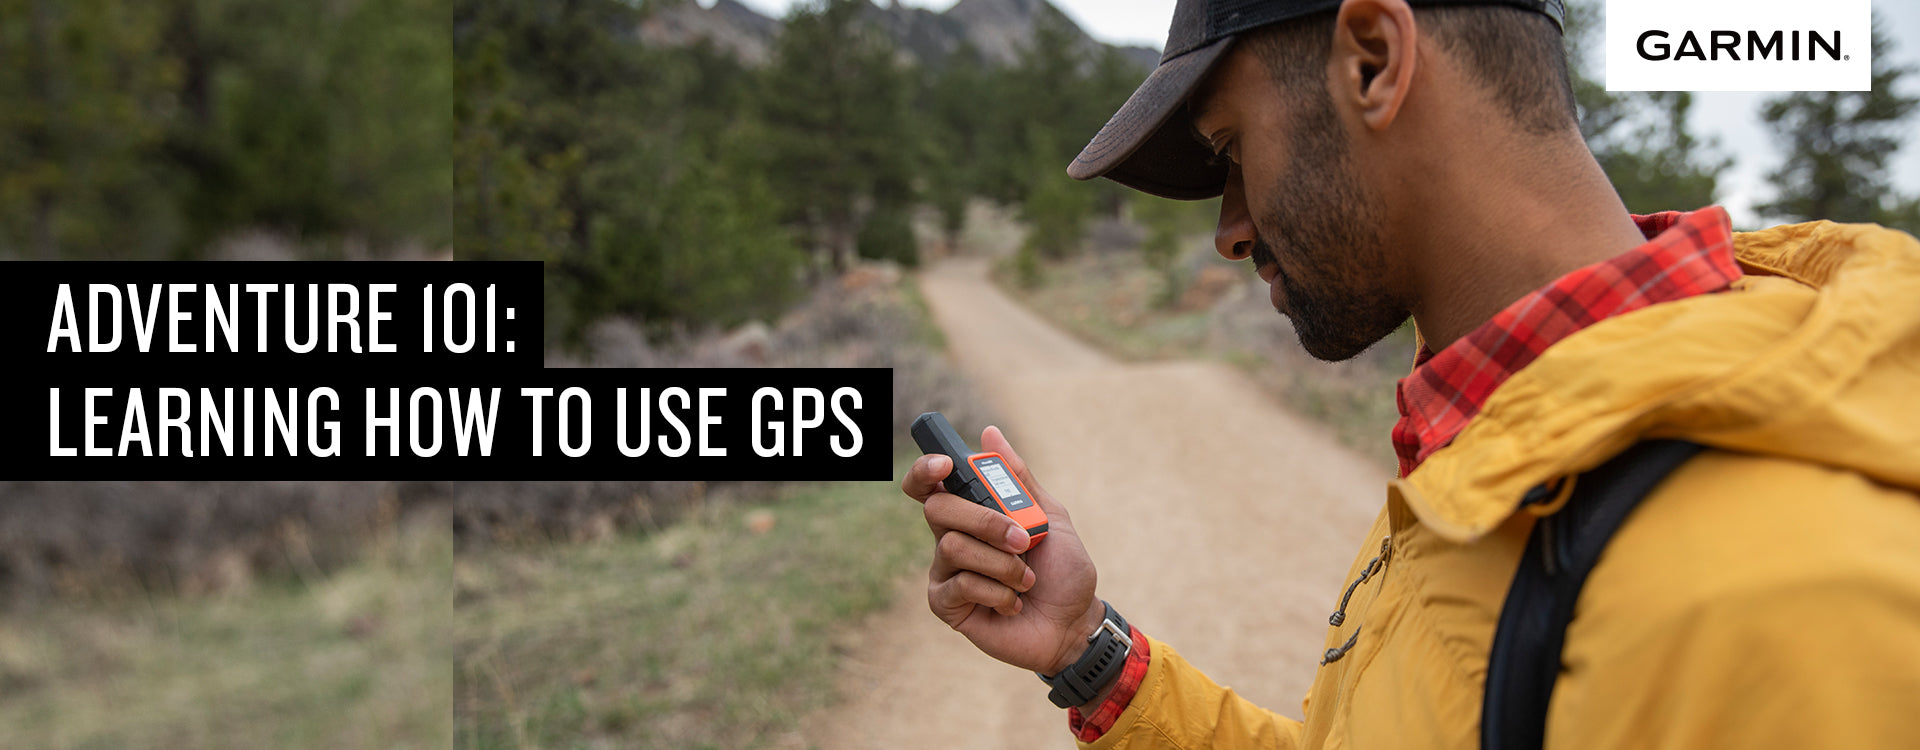 Adventure 101: Learning How to Use GPS